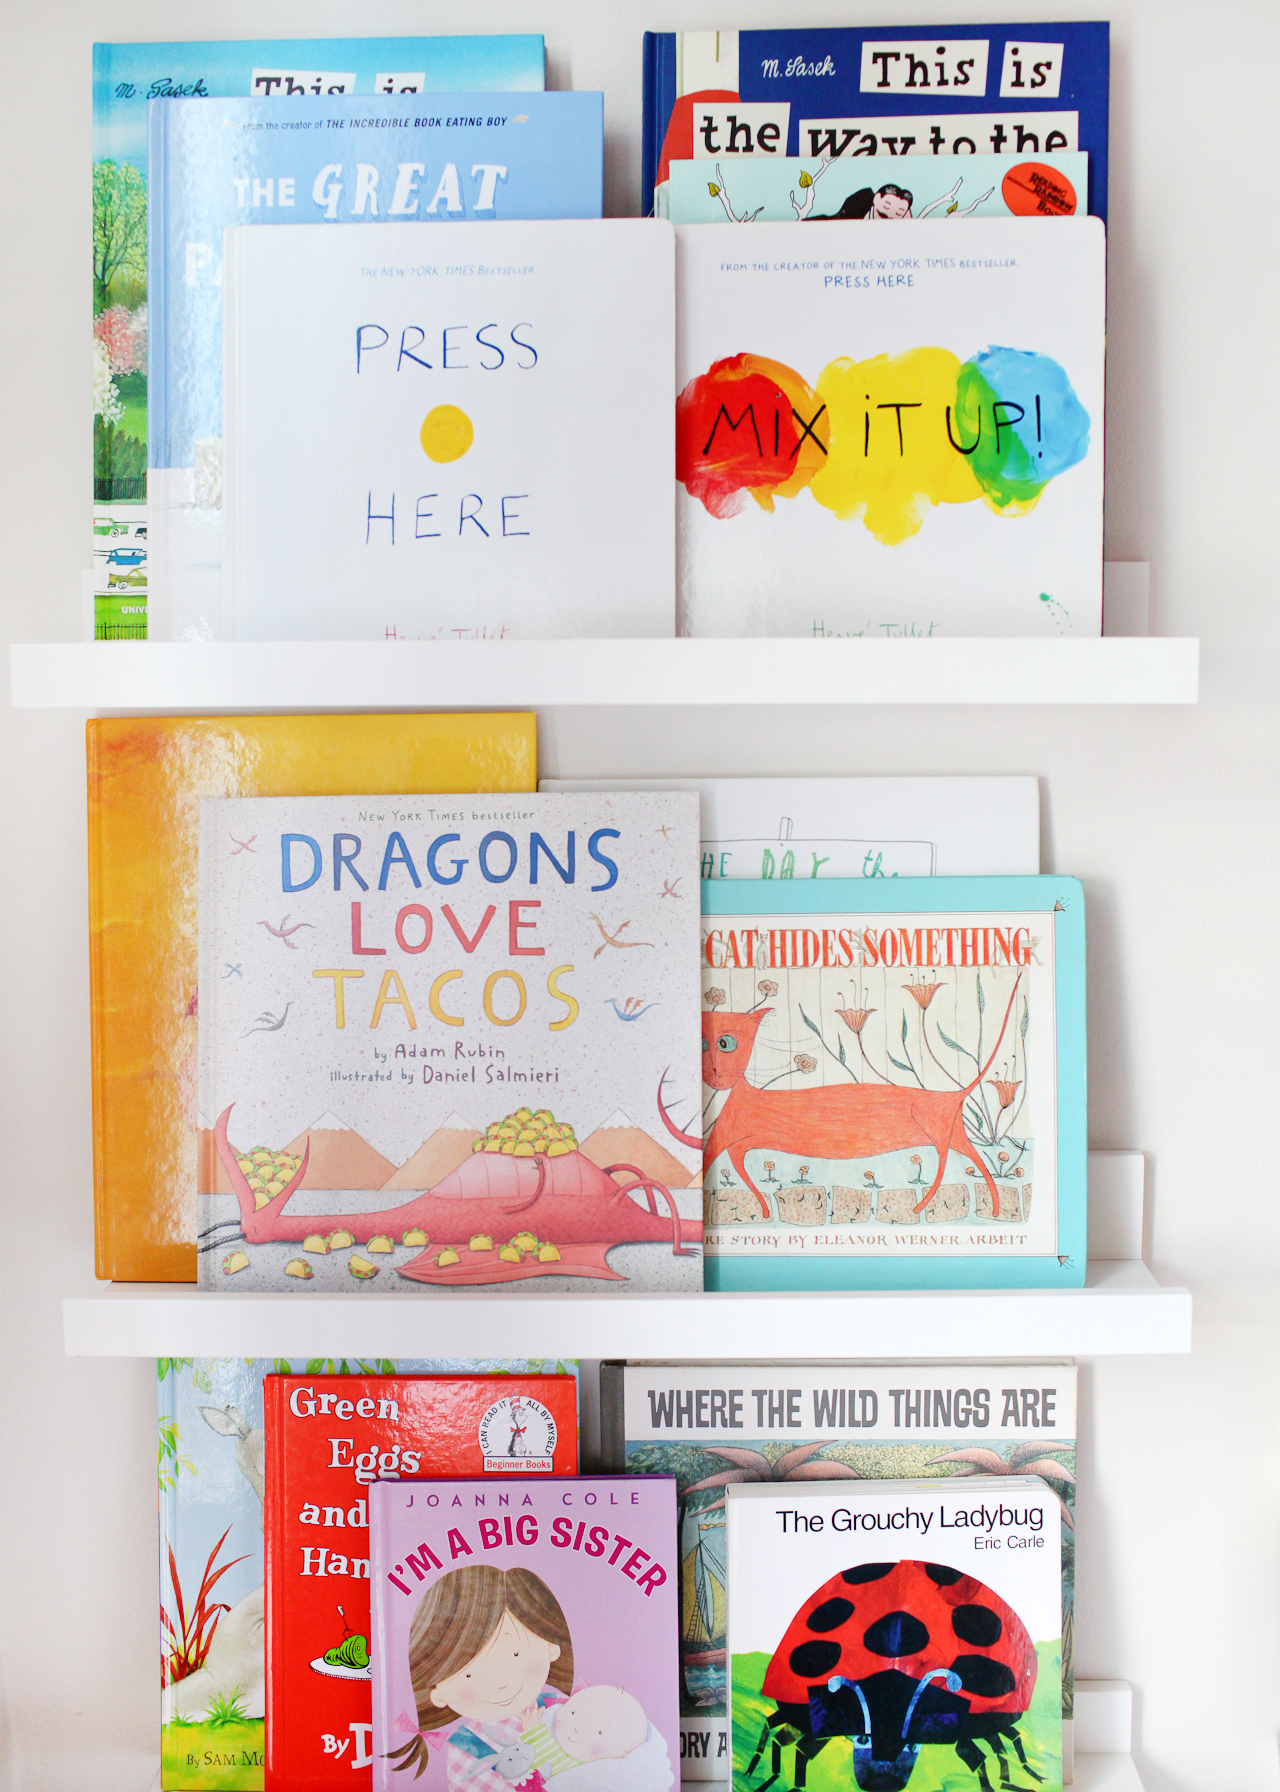 A Colorful Shared Girls Nursery / Oh So Beautiful Paper